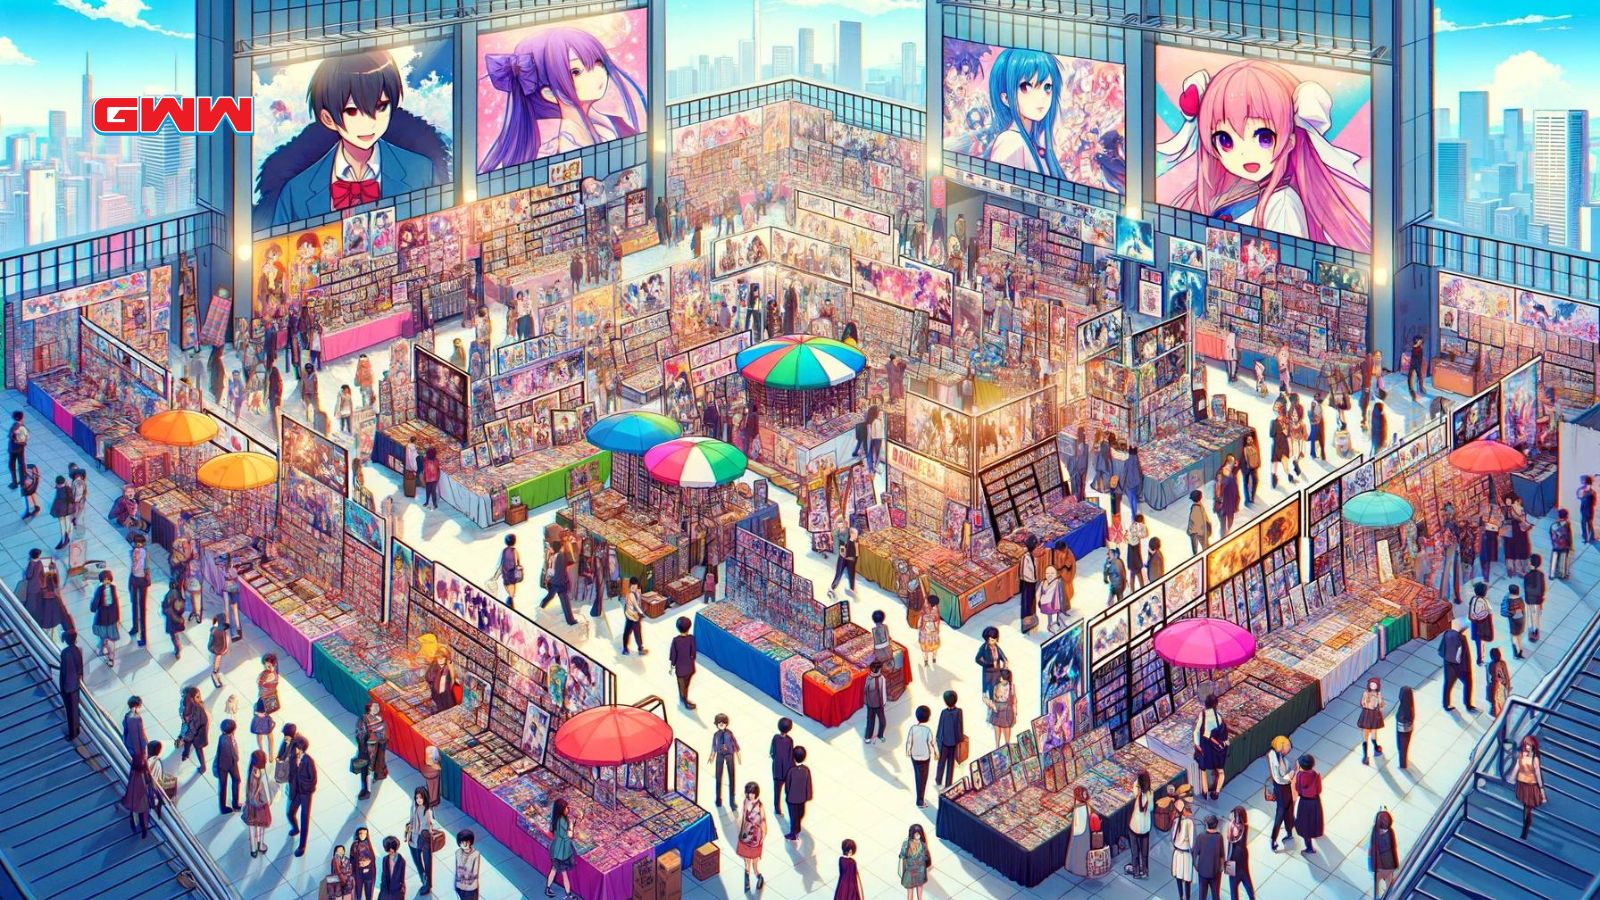 Anime convention market scene with vibrant stalls